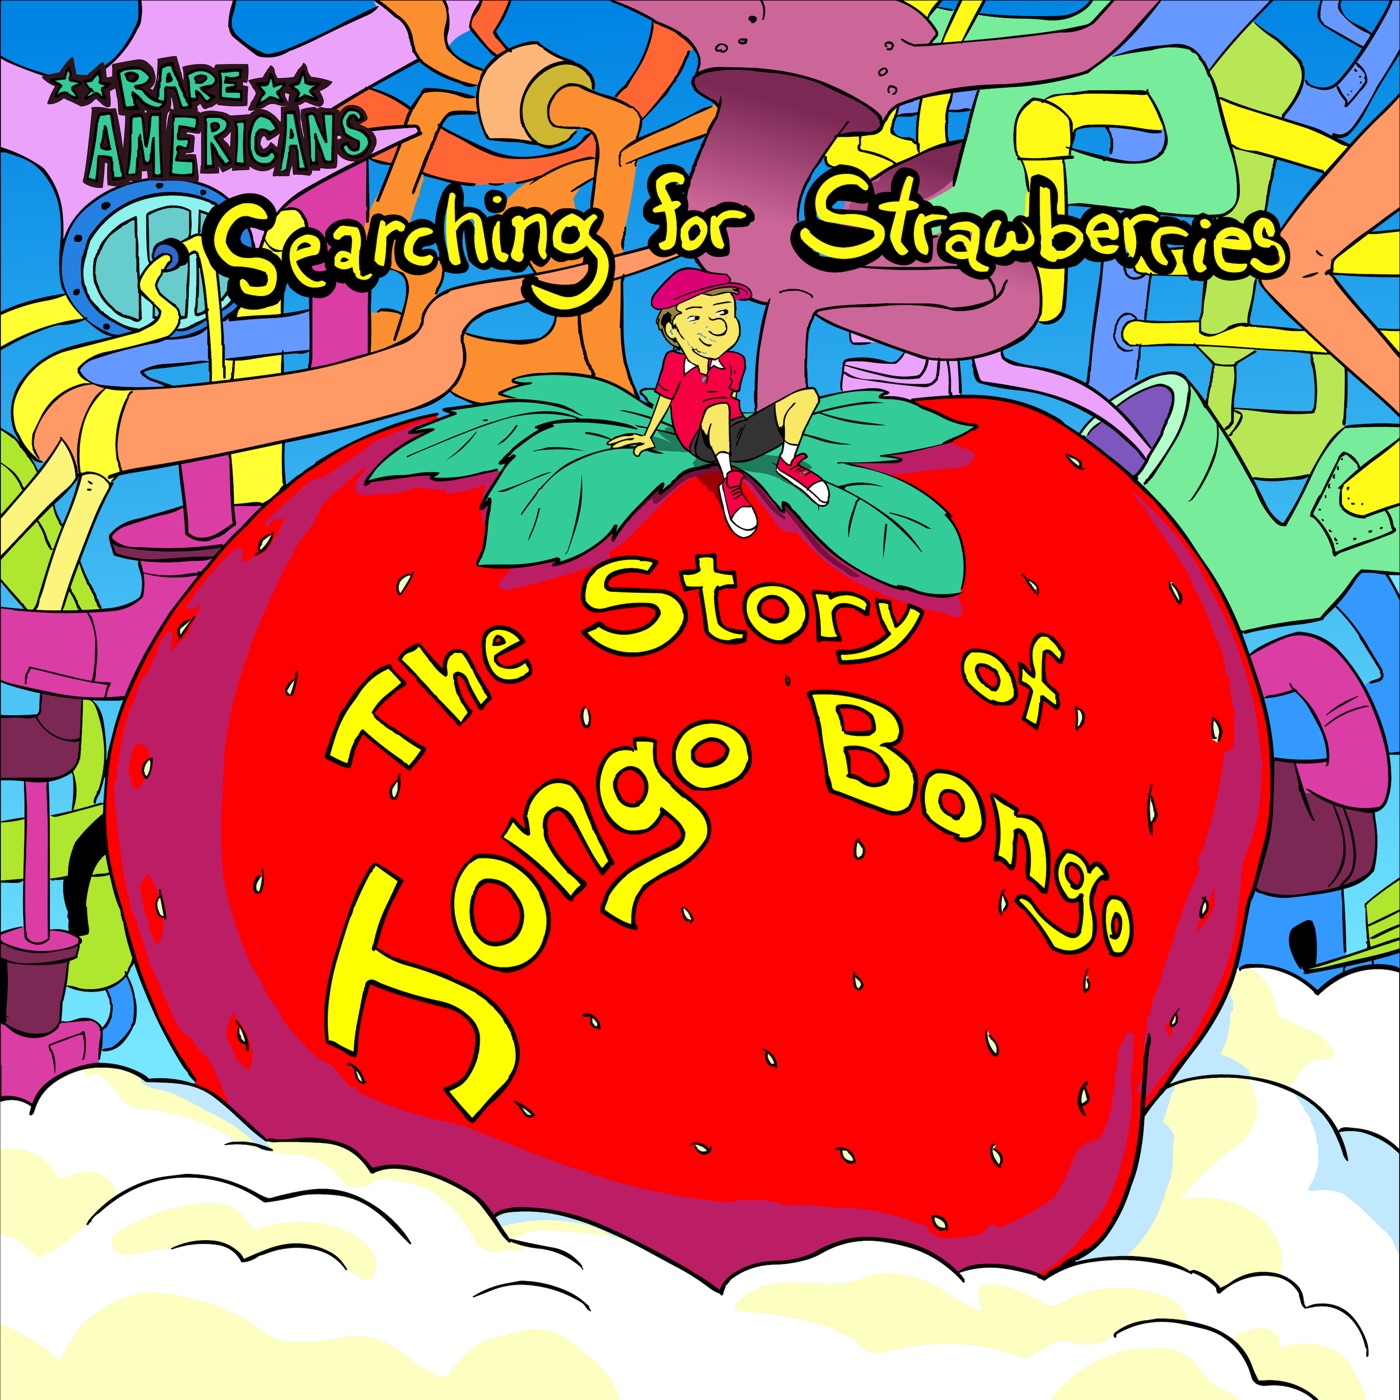 Searching for Strawberries: The Story of Jongo Bongo by Rare Americans